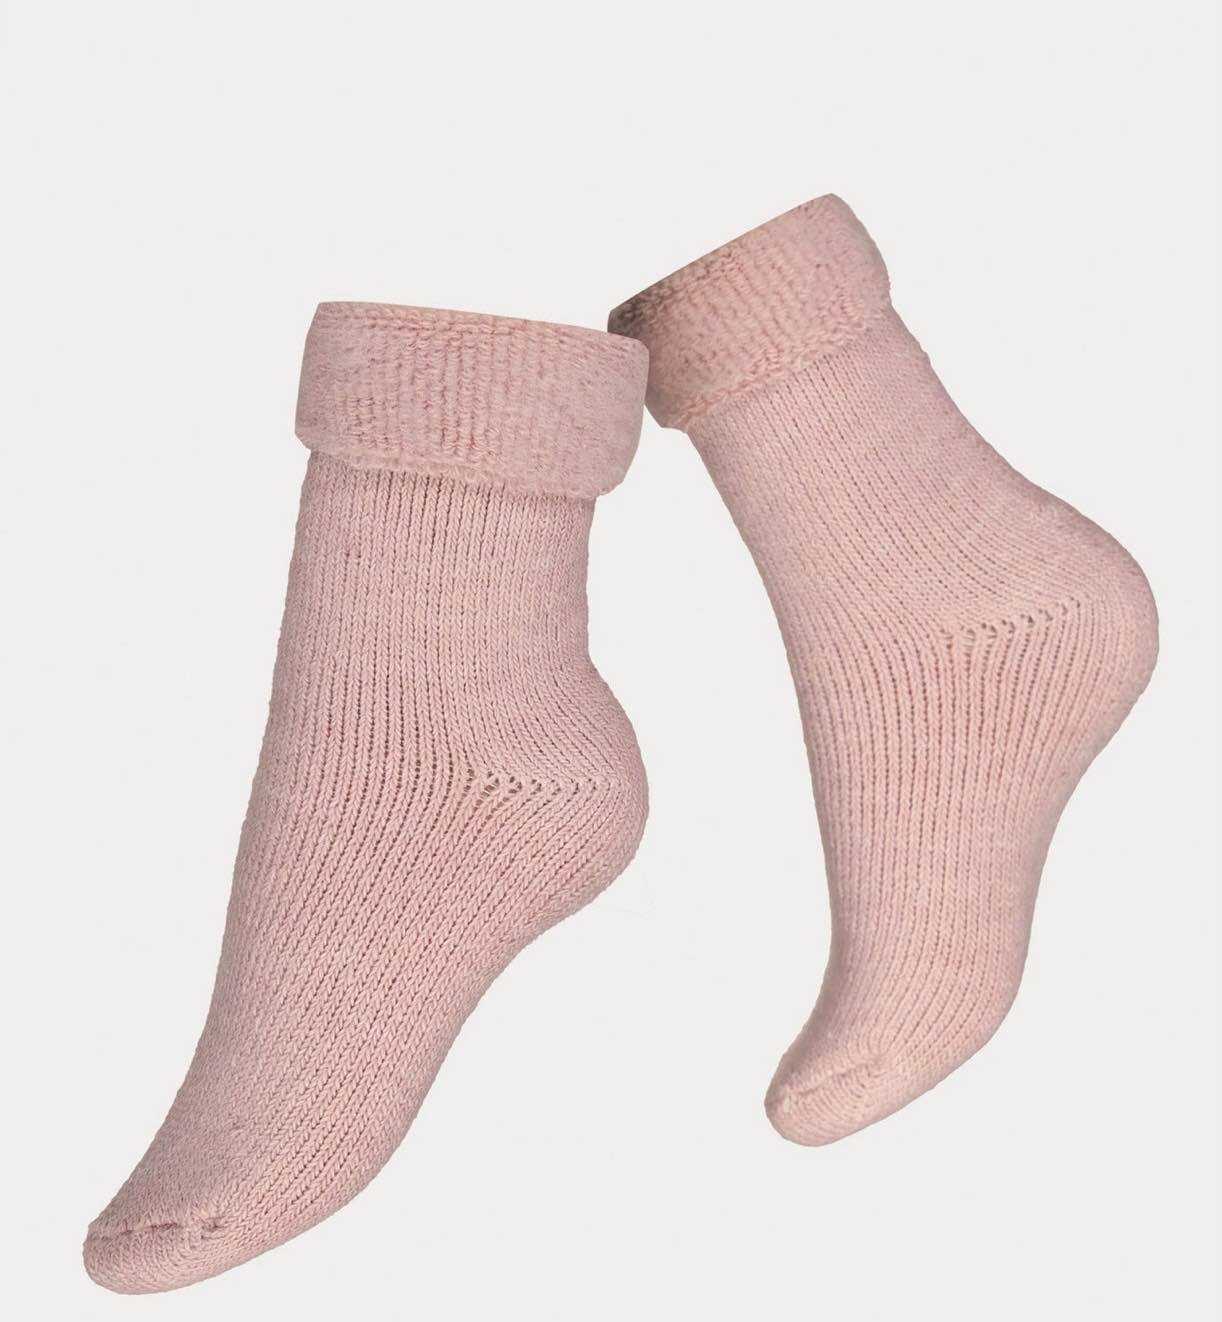 Vogue Softies Home Sock - Rose dust